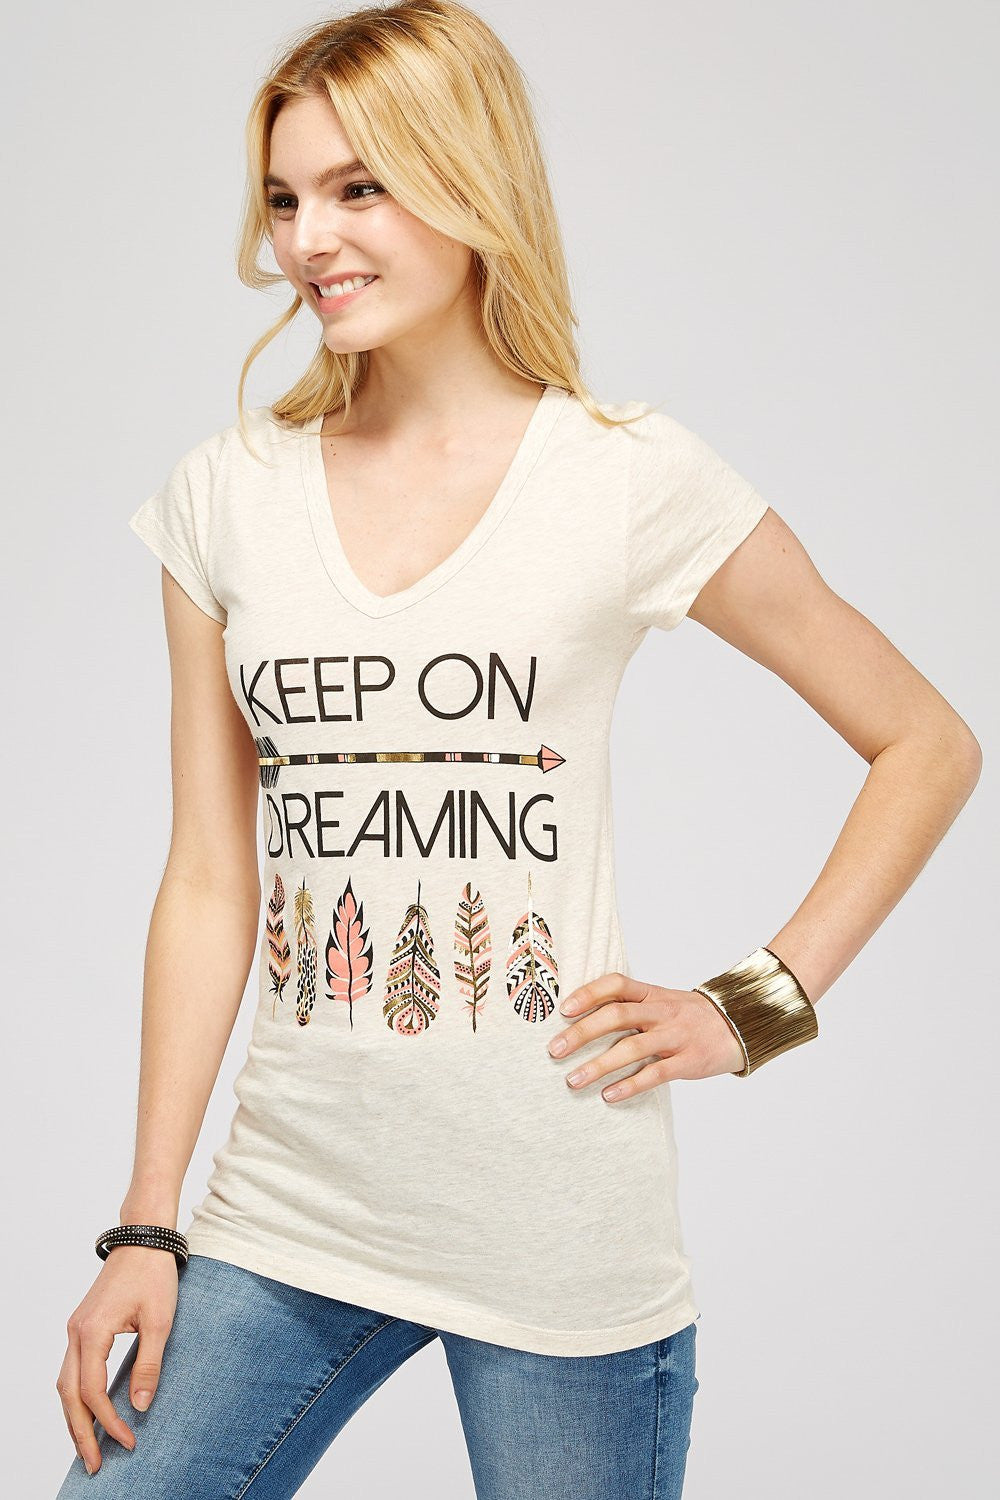 Beautiful woman wearing an Beige V.neck tee "Keep On Dreaming" Perfect skirt for an effortless boho style, pair with boots for fall or your favorite sandals for summer. Festivals, Beach Day, Vacation